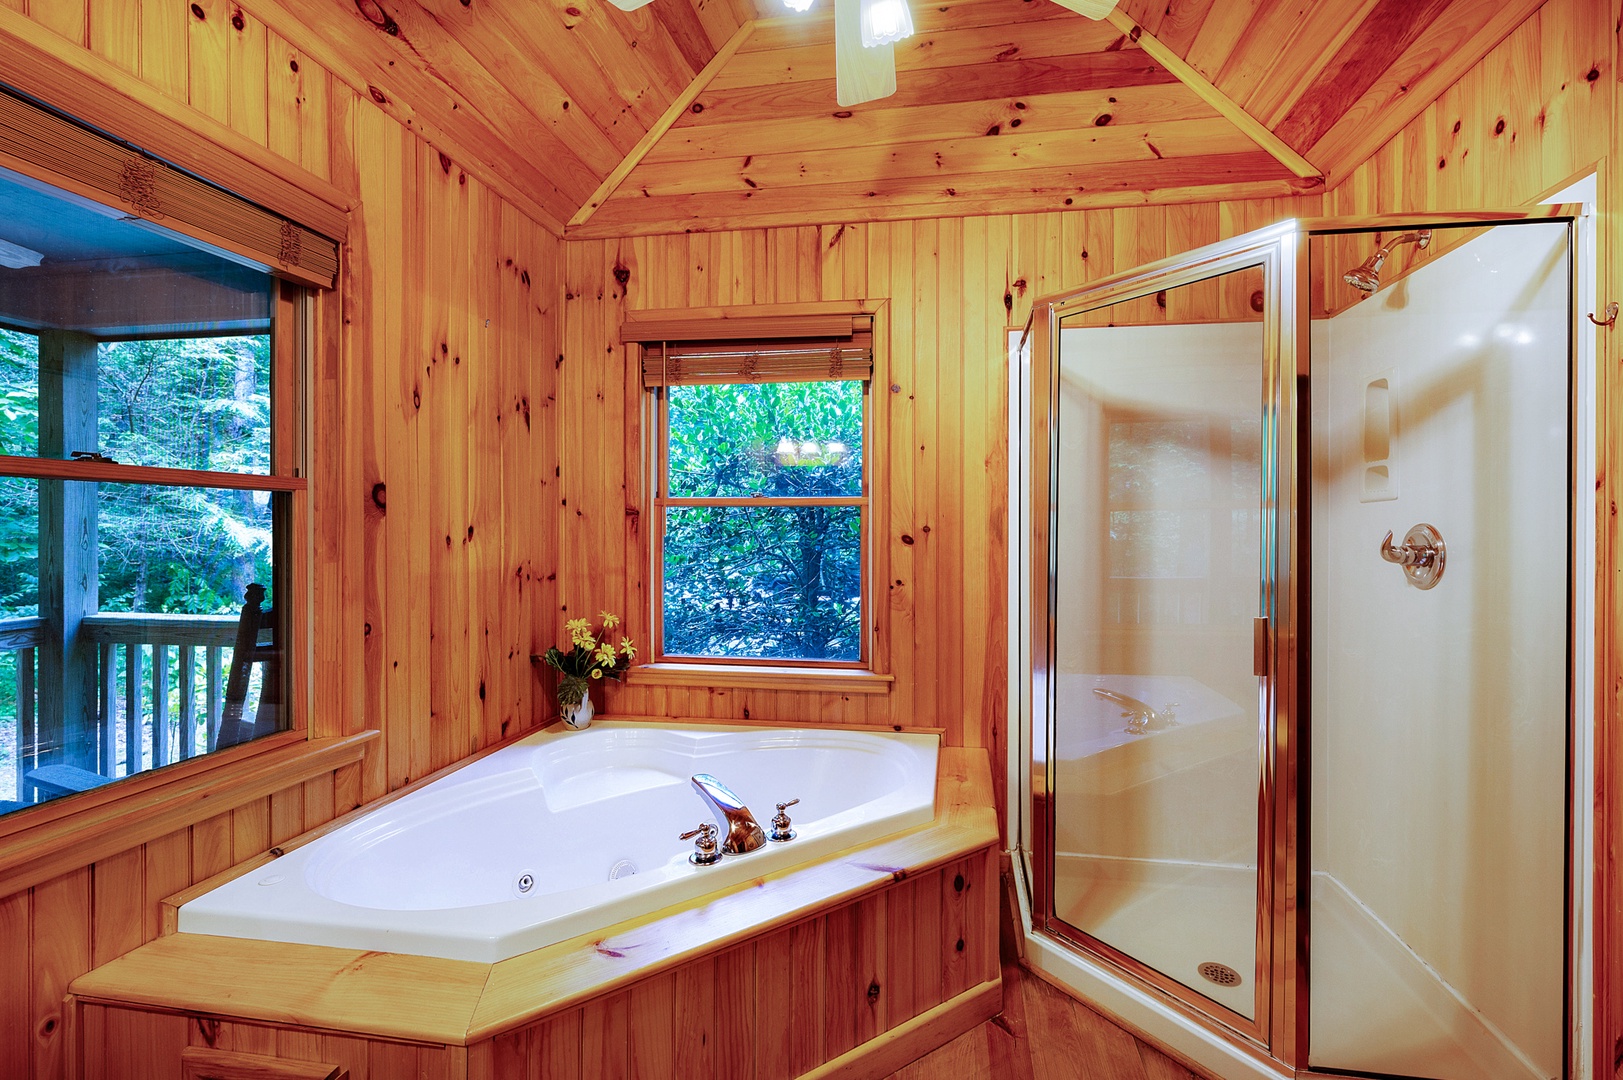 A Whitewater Retreat - Primary King Bedroom's Private Bathroom